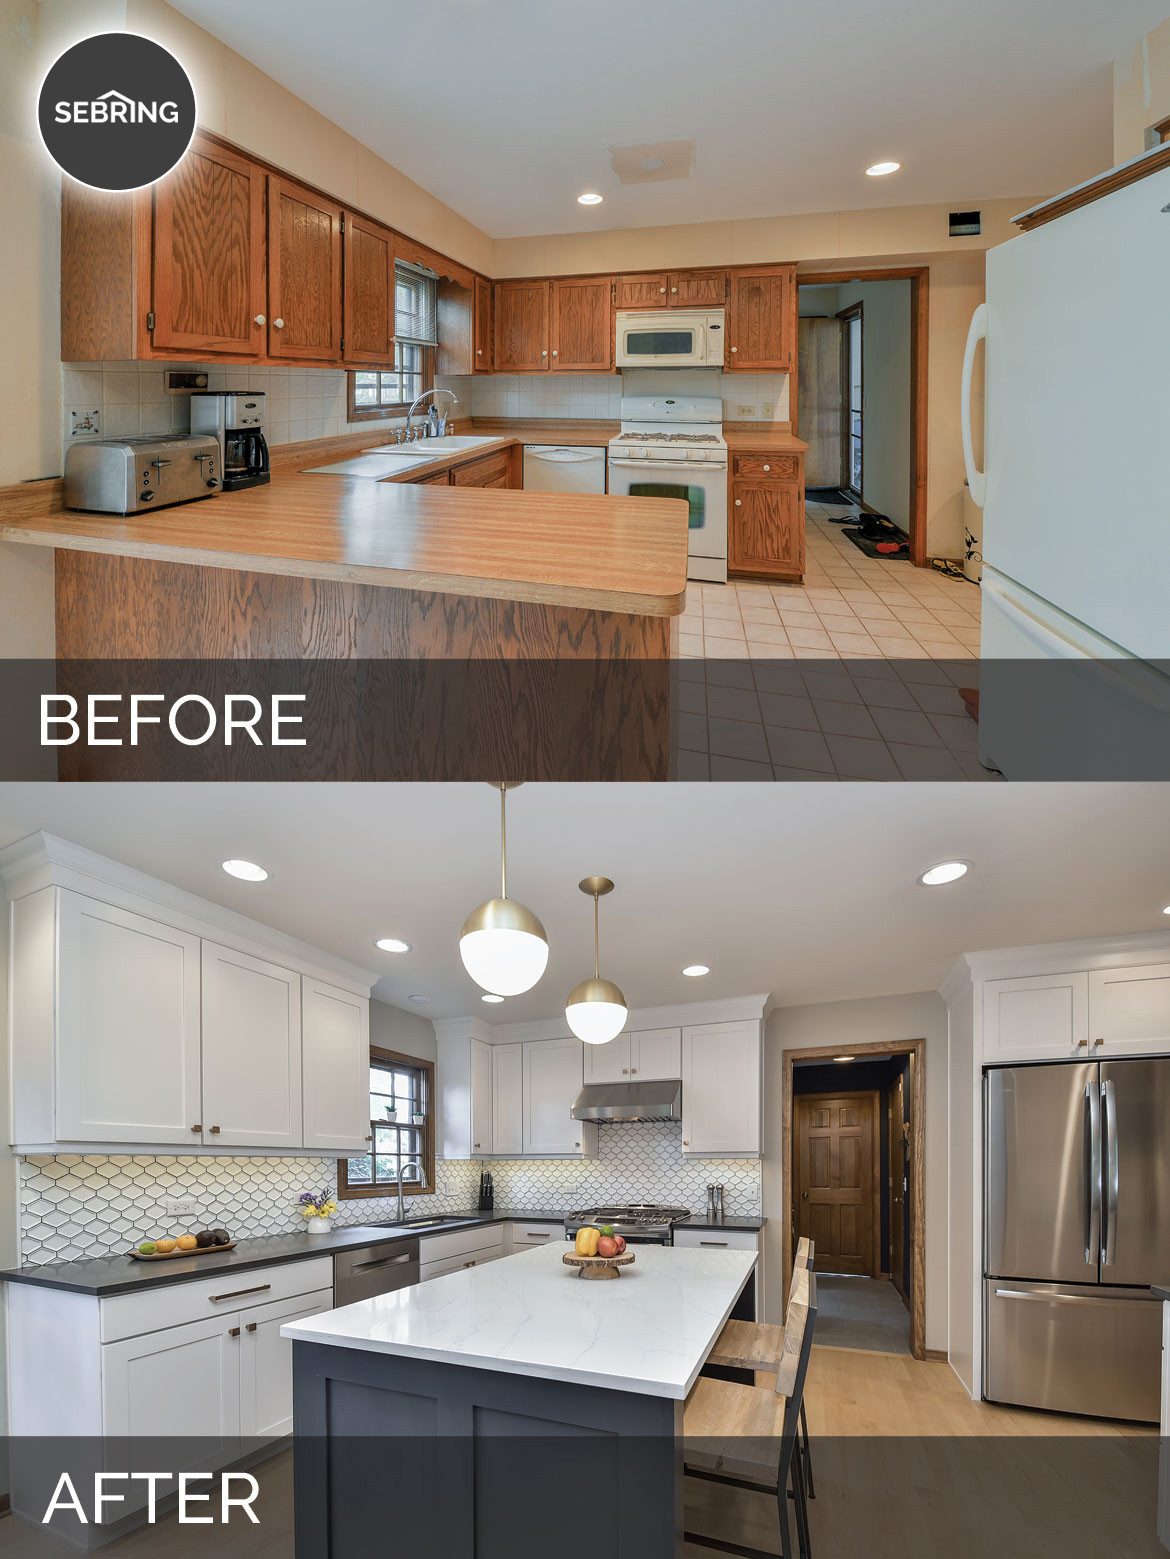 Kitchen Remodels Before And After
 Justin & Carina’s Kitchen Before & After